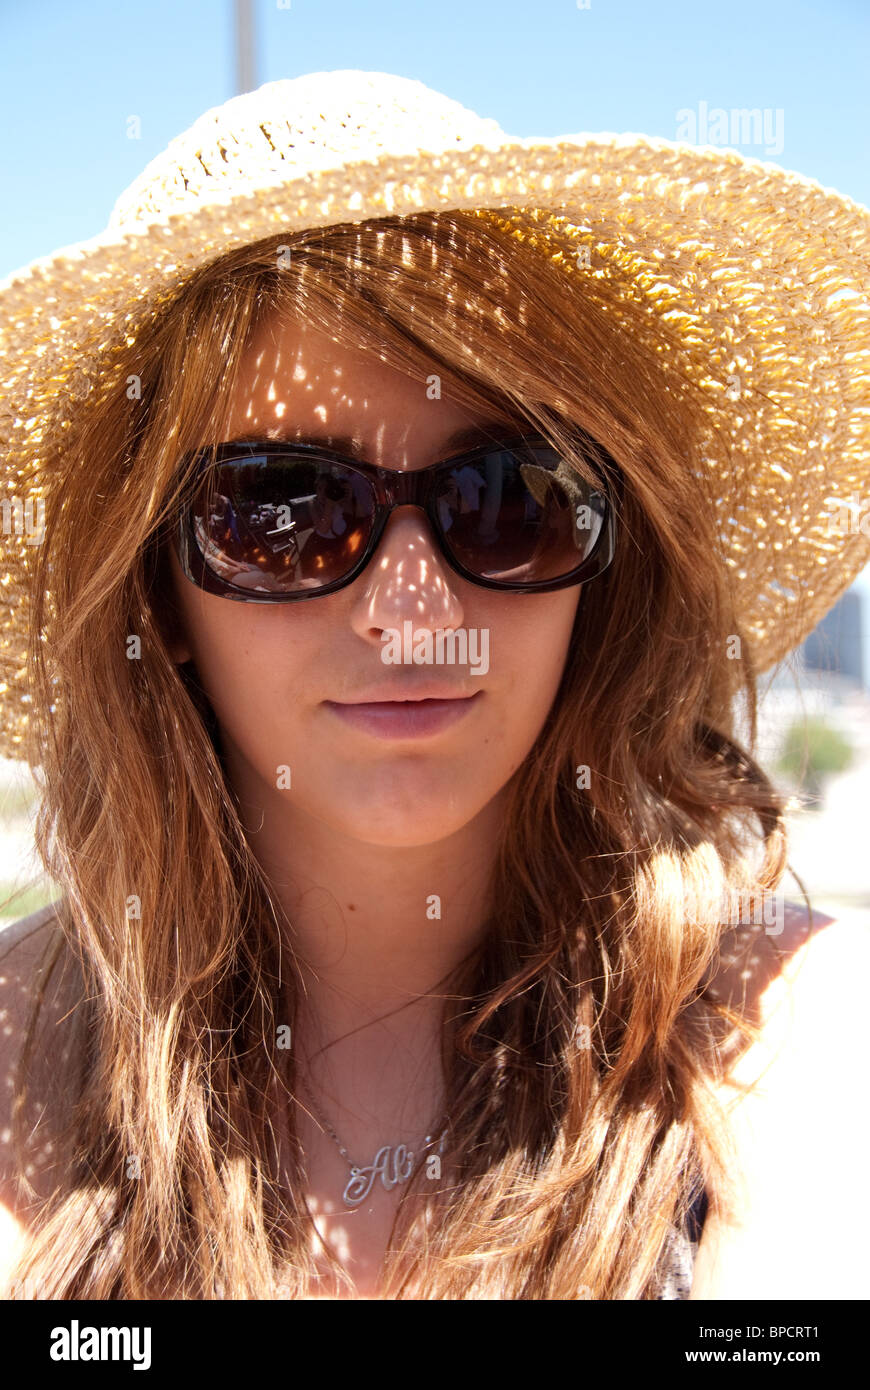 girl in straw hat and sunglasses Stock Photo